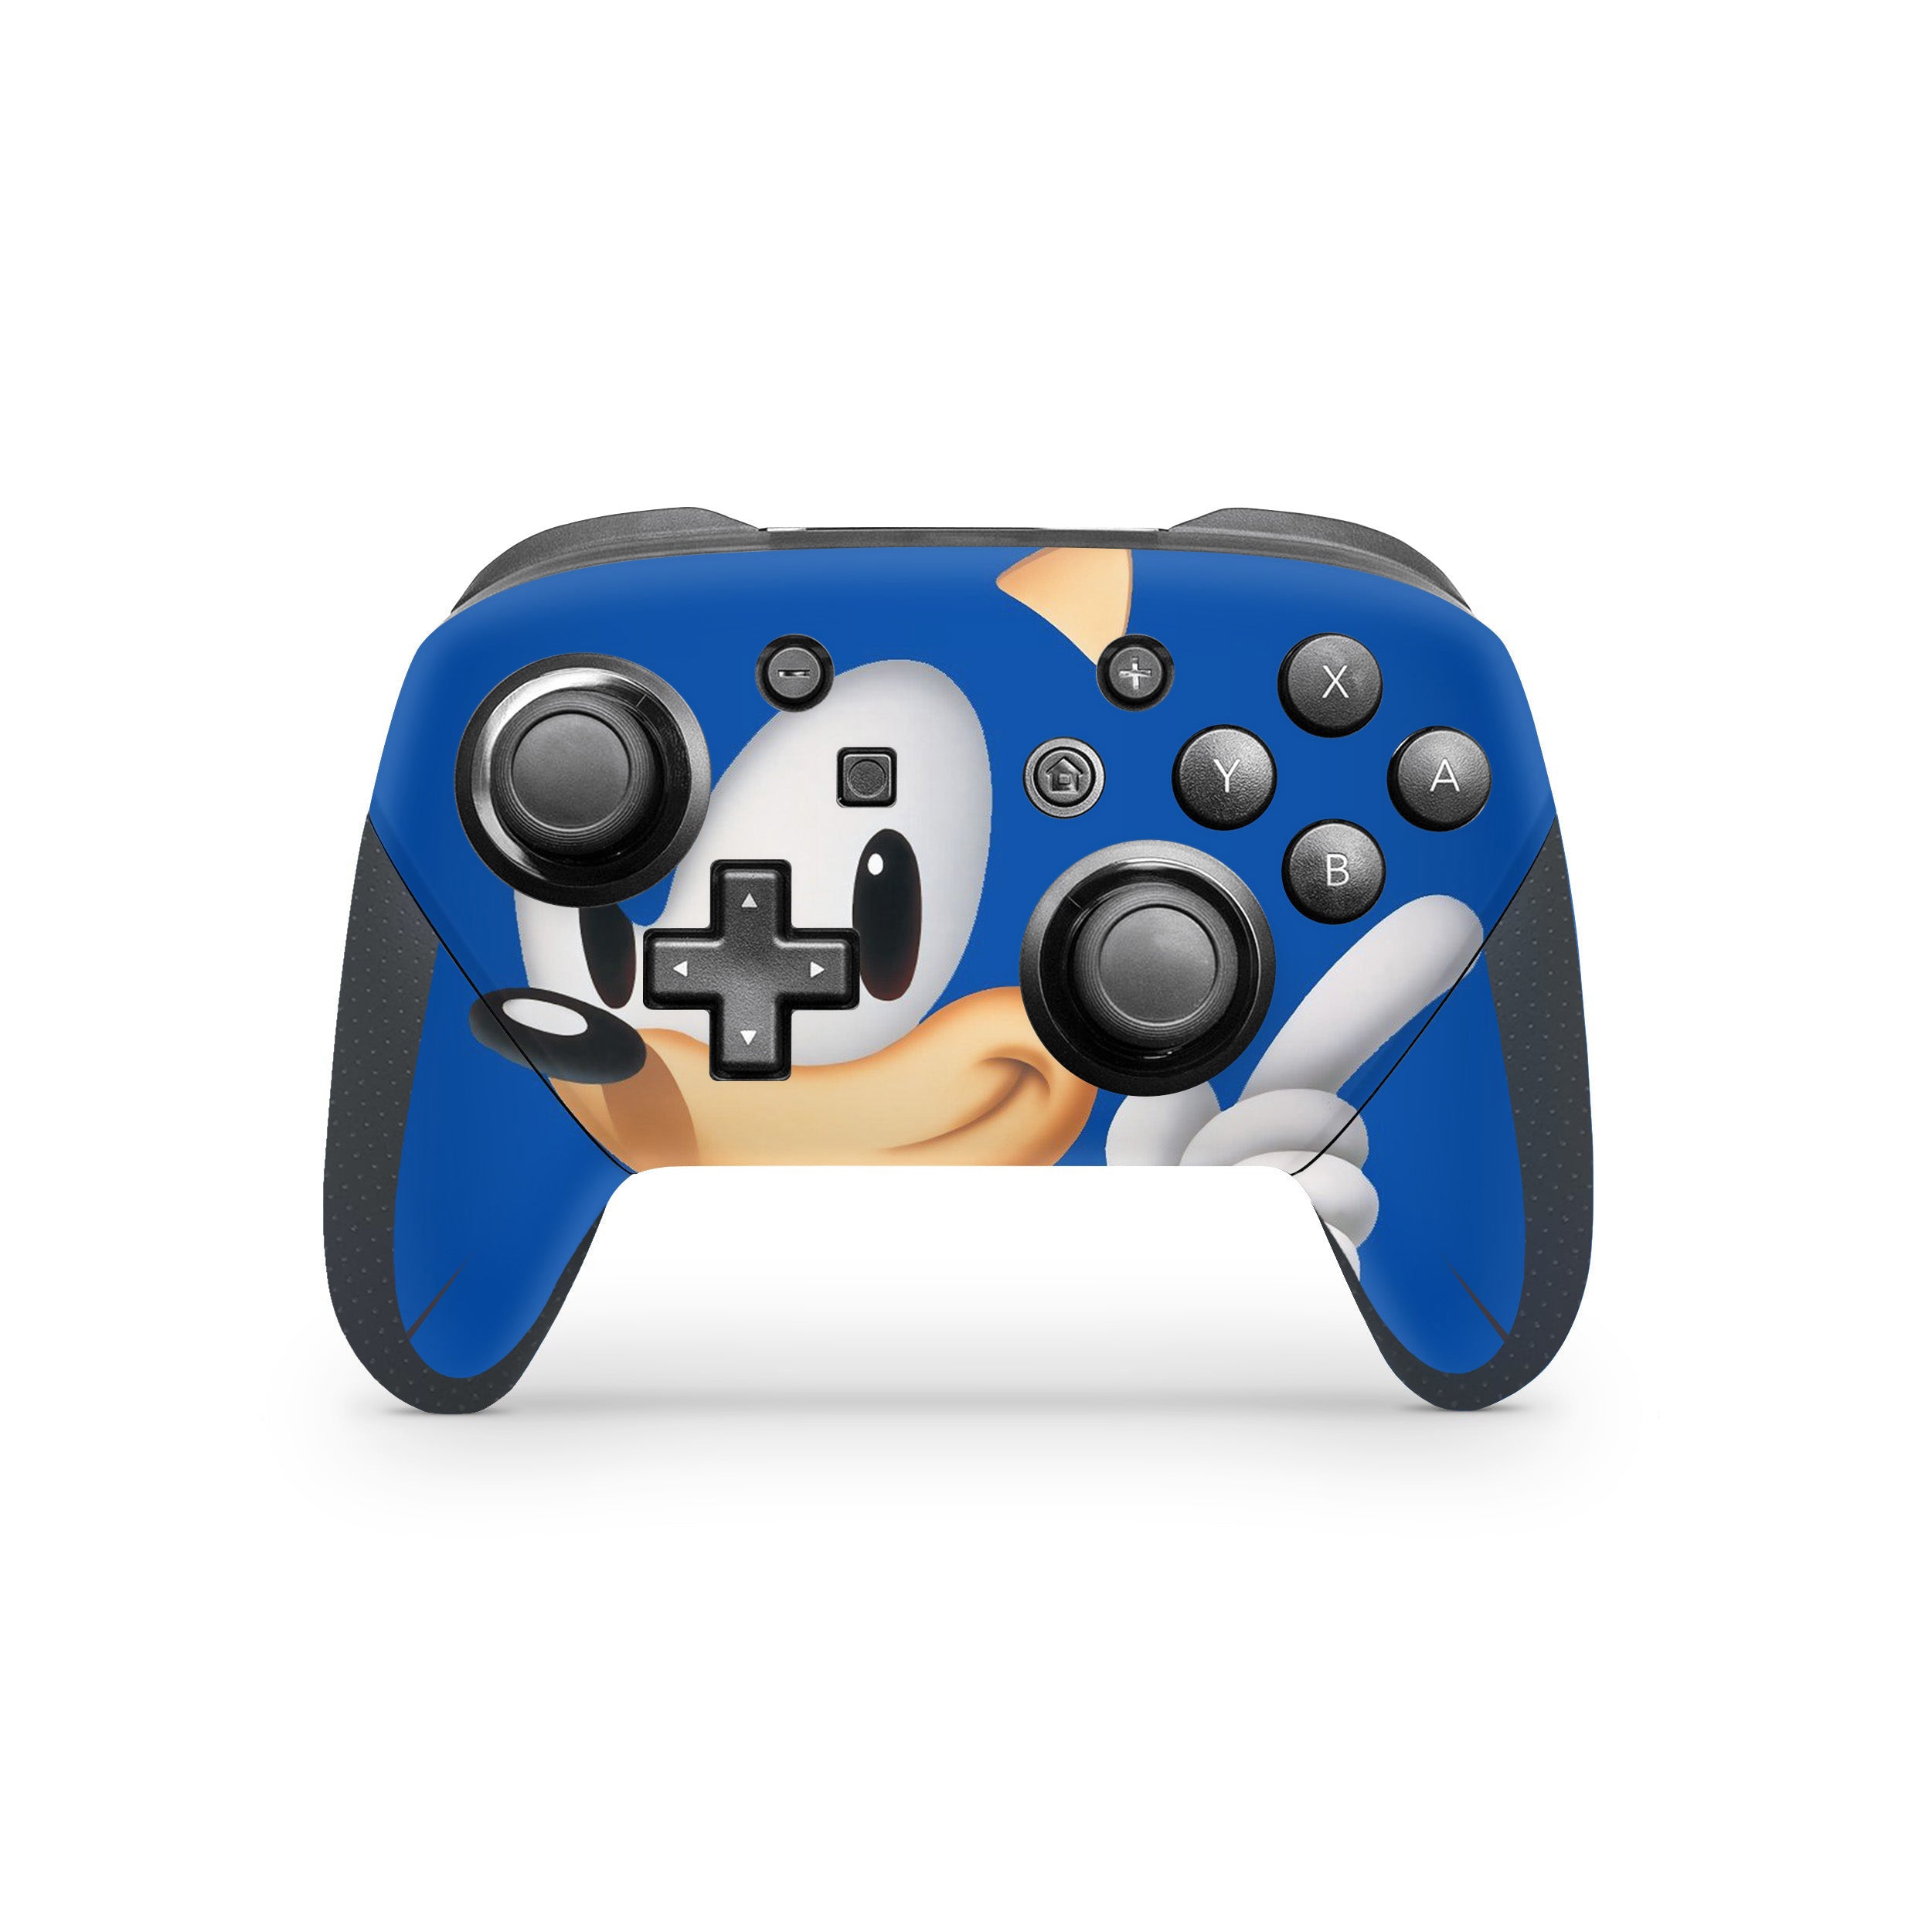 A video game skin featuring a Sonic The Hedgehog design for the Switch Pro Controller.